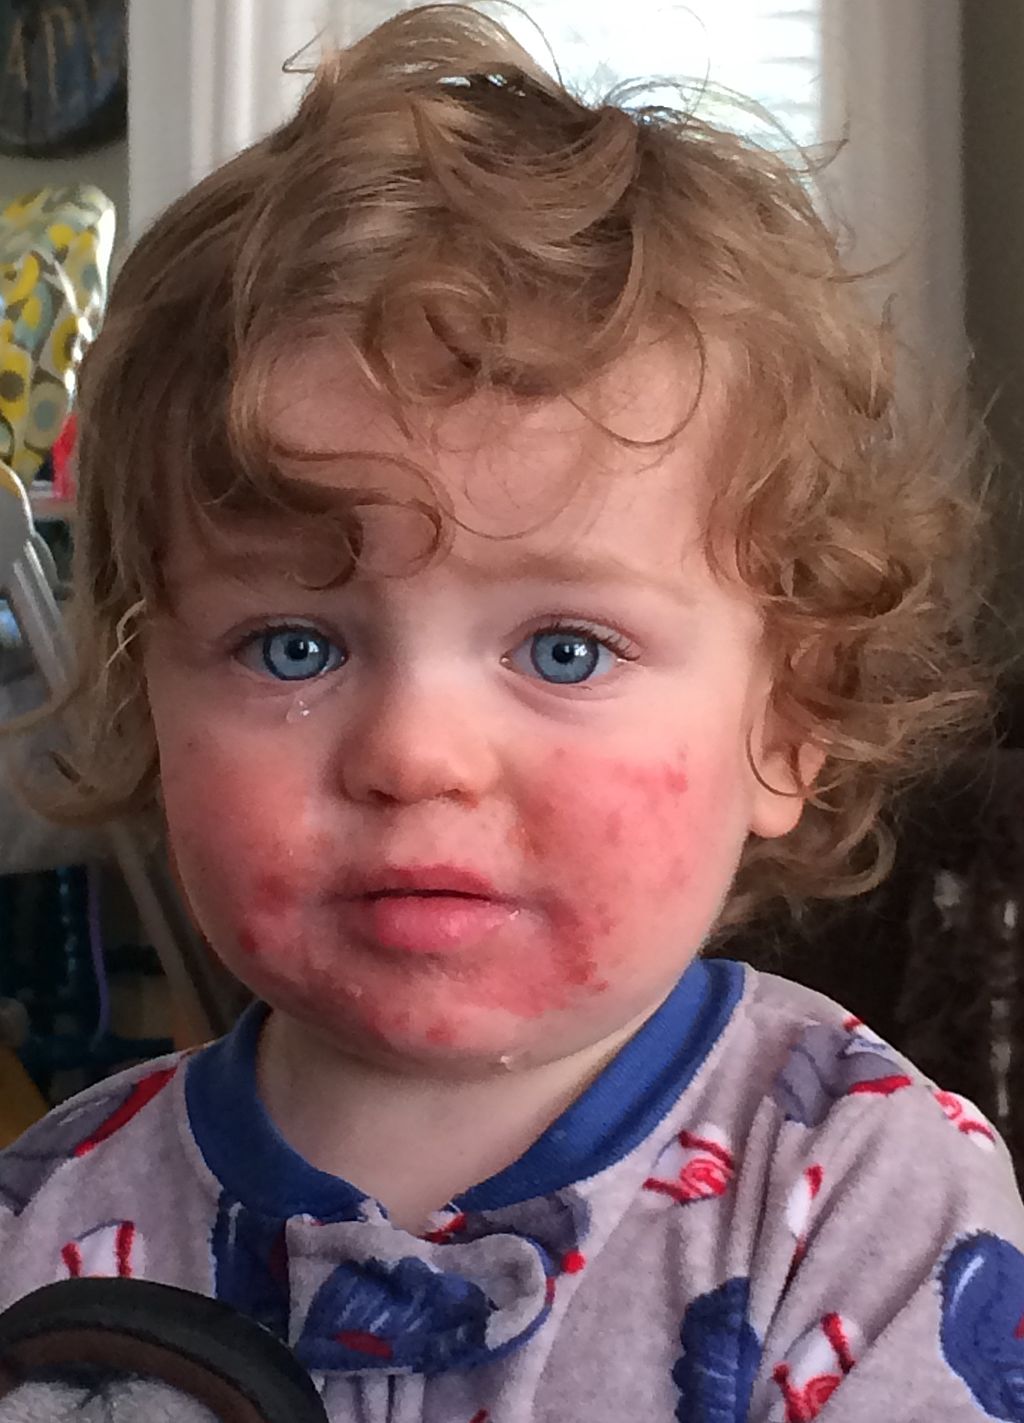 14 month old with Fifth Disease